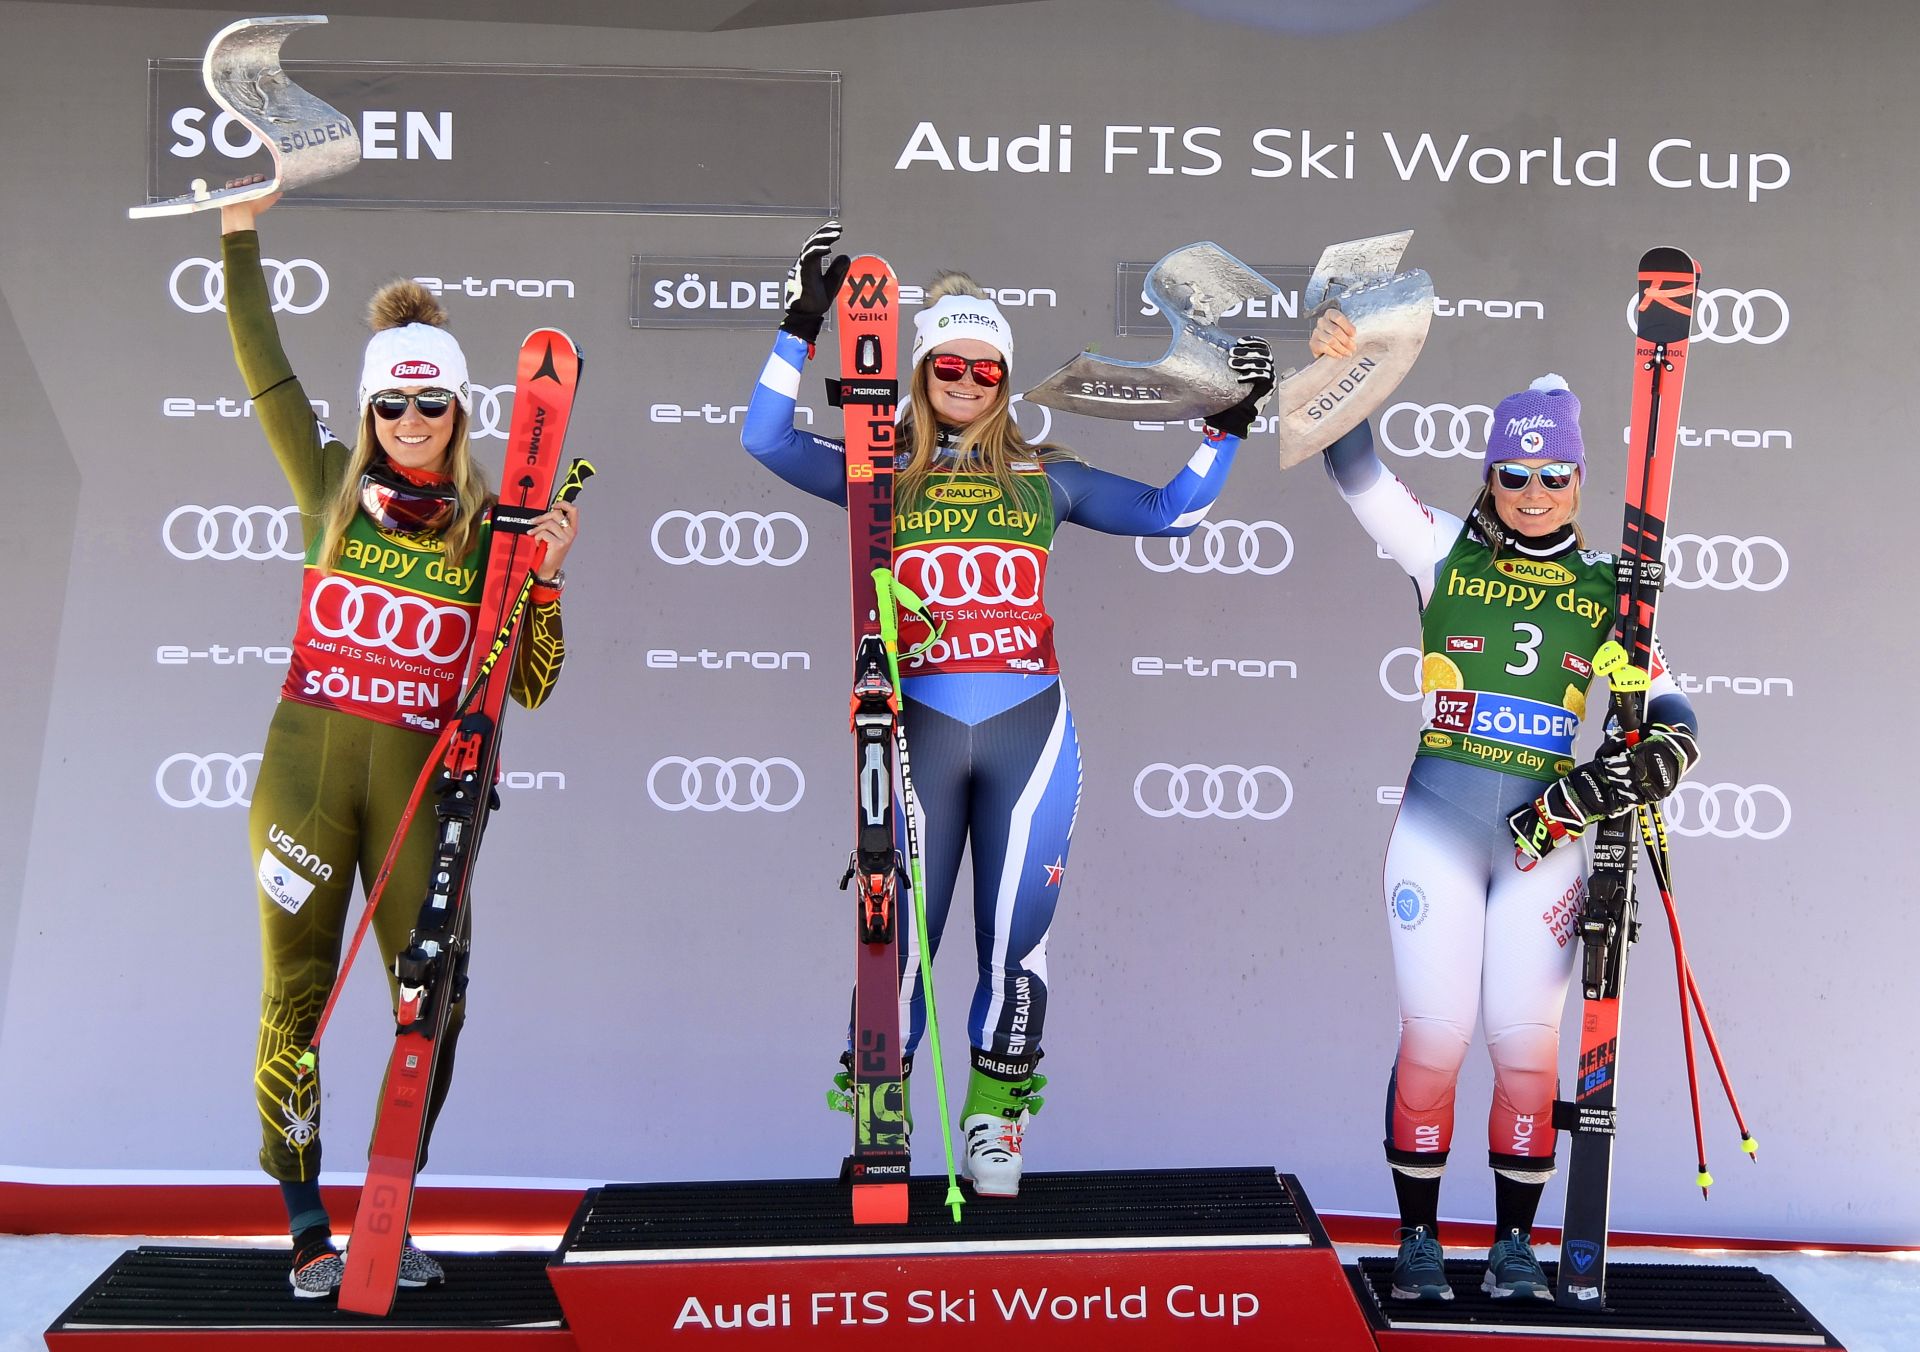 epa07950973 Alice Robinson (C) of New Zealand celebrates on the podium after winning the women's Giant Slalom race of the FIS Alpine Skiing World Cup season opener in Soelden, Austria, 26 October 2019. Robinson won ahead of second placed Mikaela Shiffrin (L) of the USA and third placed Tessa Worley (R) of France.  EPA/CHRISTIAN BRUNA